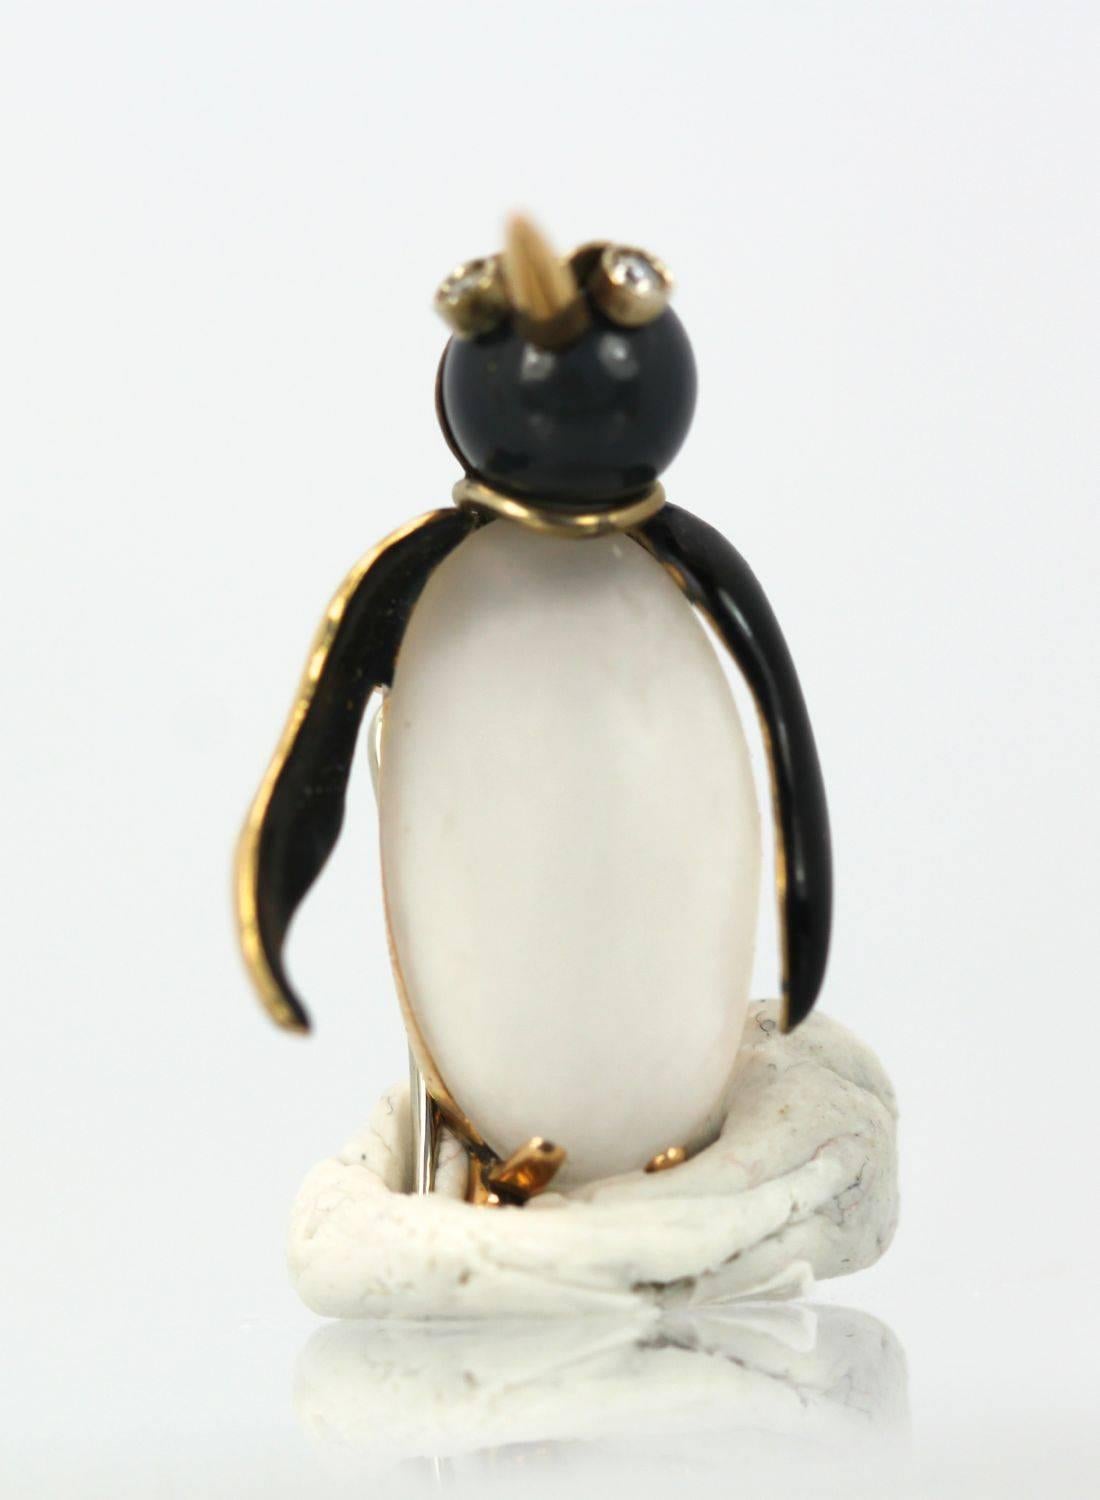 These delightful 18K Gold Moonstone penguins are attributed to Fasano, a fine jeweler in Italy and they are so cute.  Each penguin has a main body of Moonstone one at 5.00 carats and the other at 6.00 carats, with Black enamel bodies set in Yellow